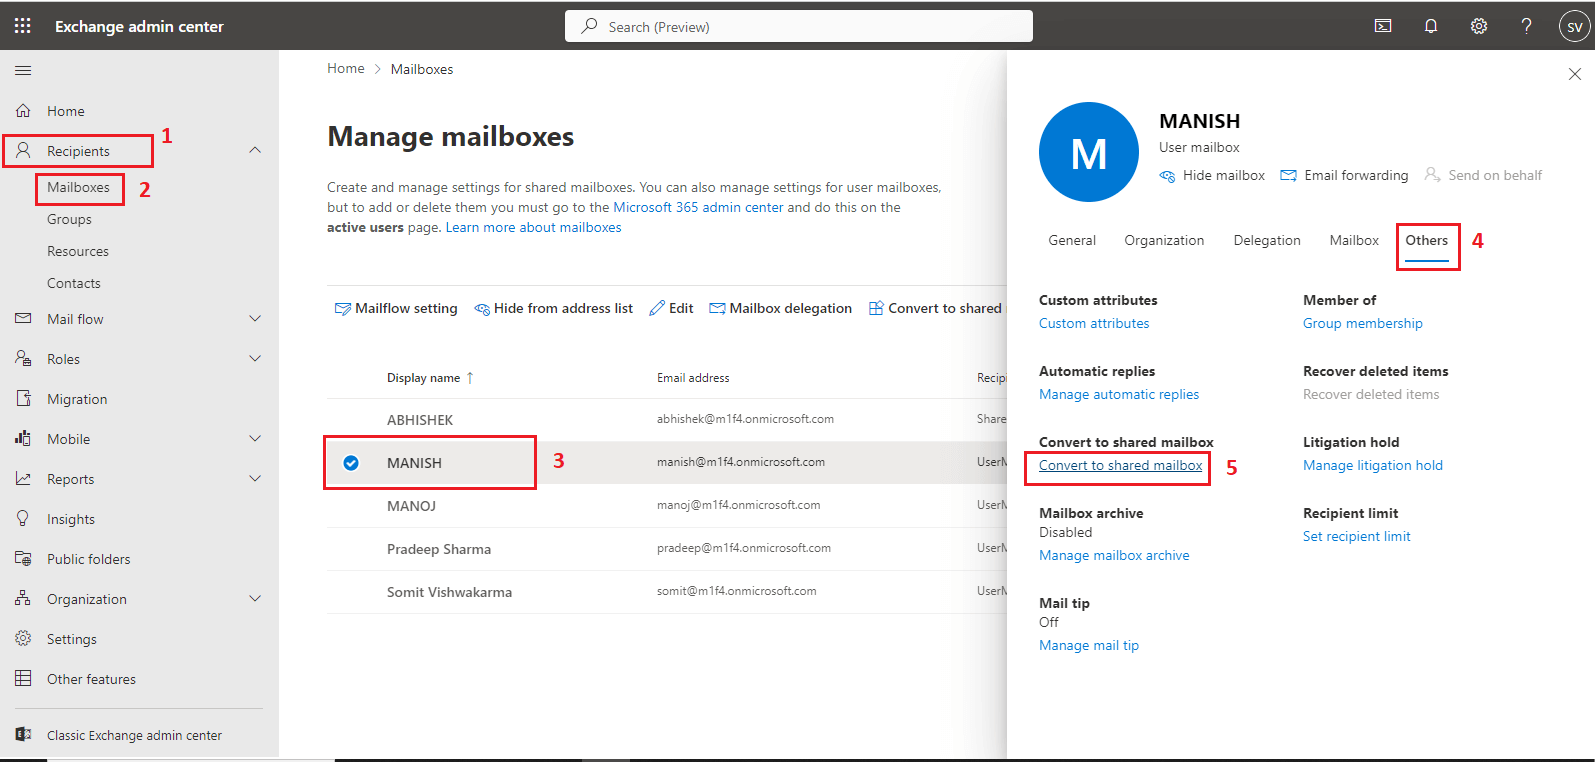 convert mailbox to shared using EAC